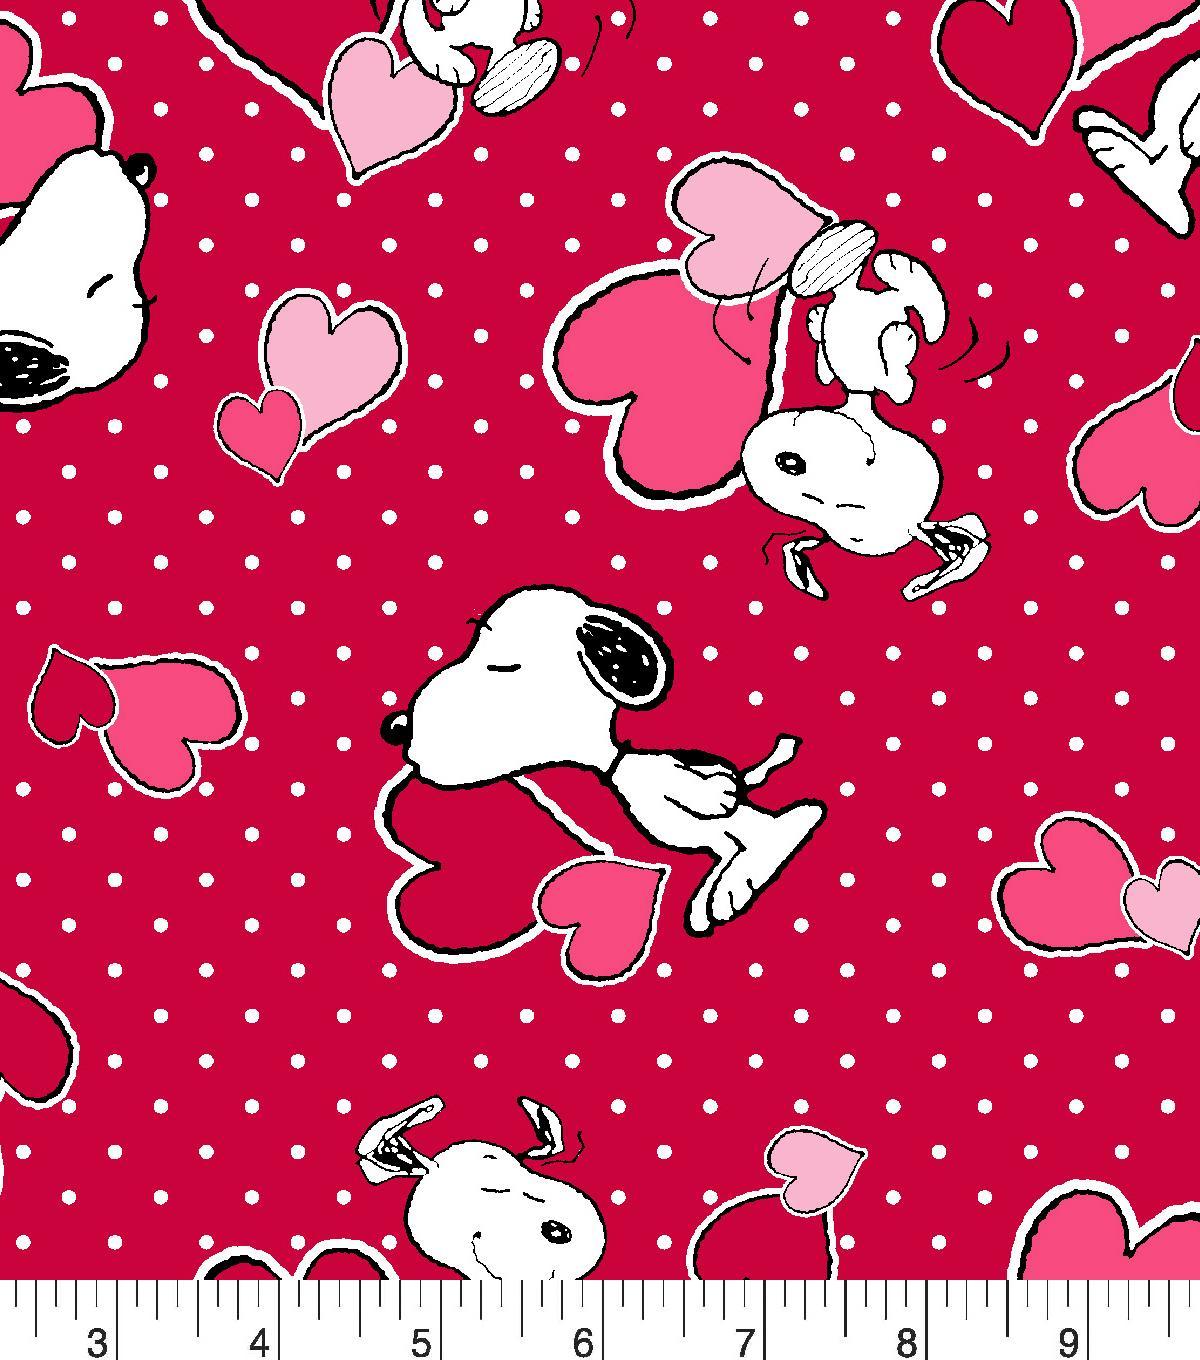 Download Snoopy Valentines Day Wallpaper, HD Backgrounds.